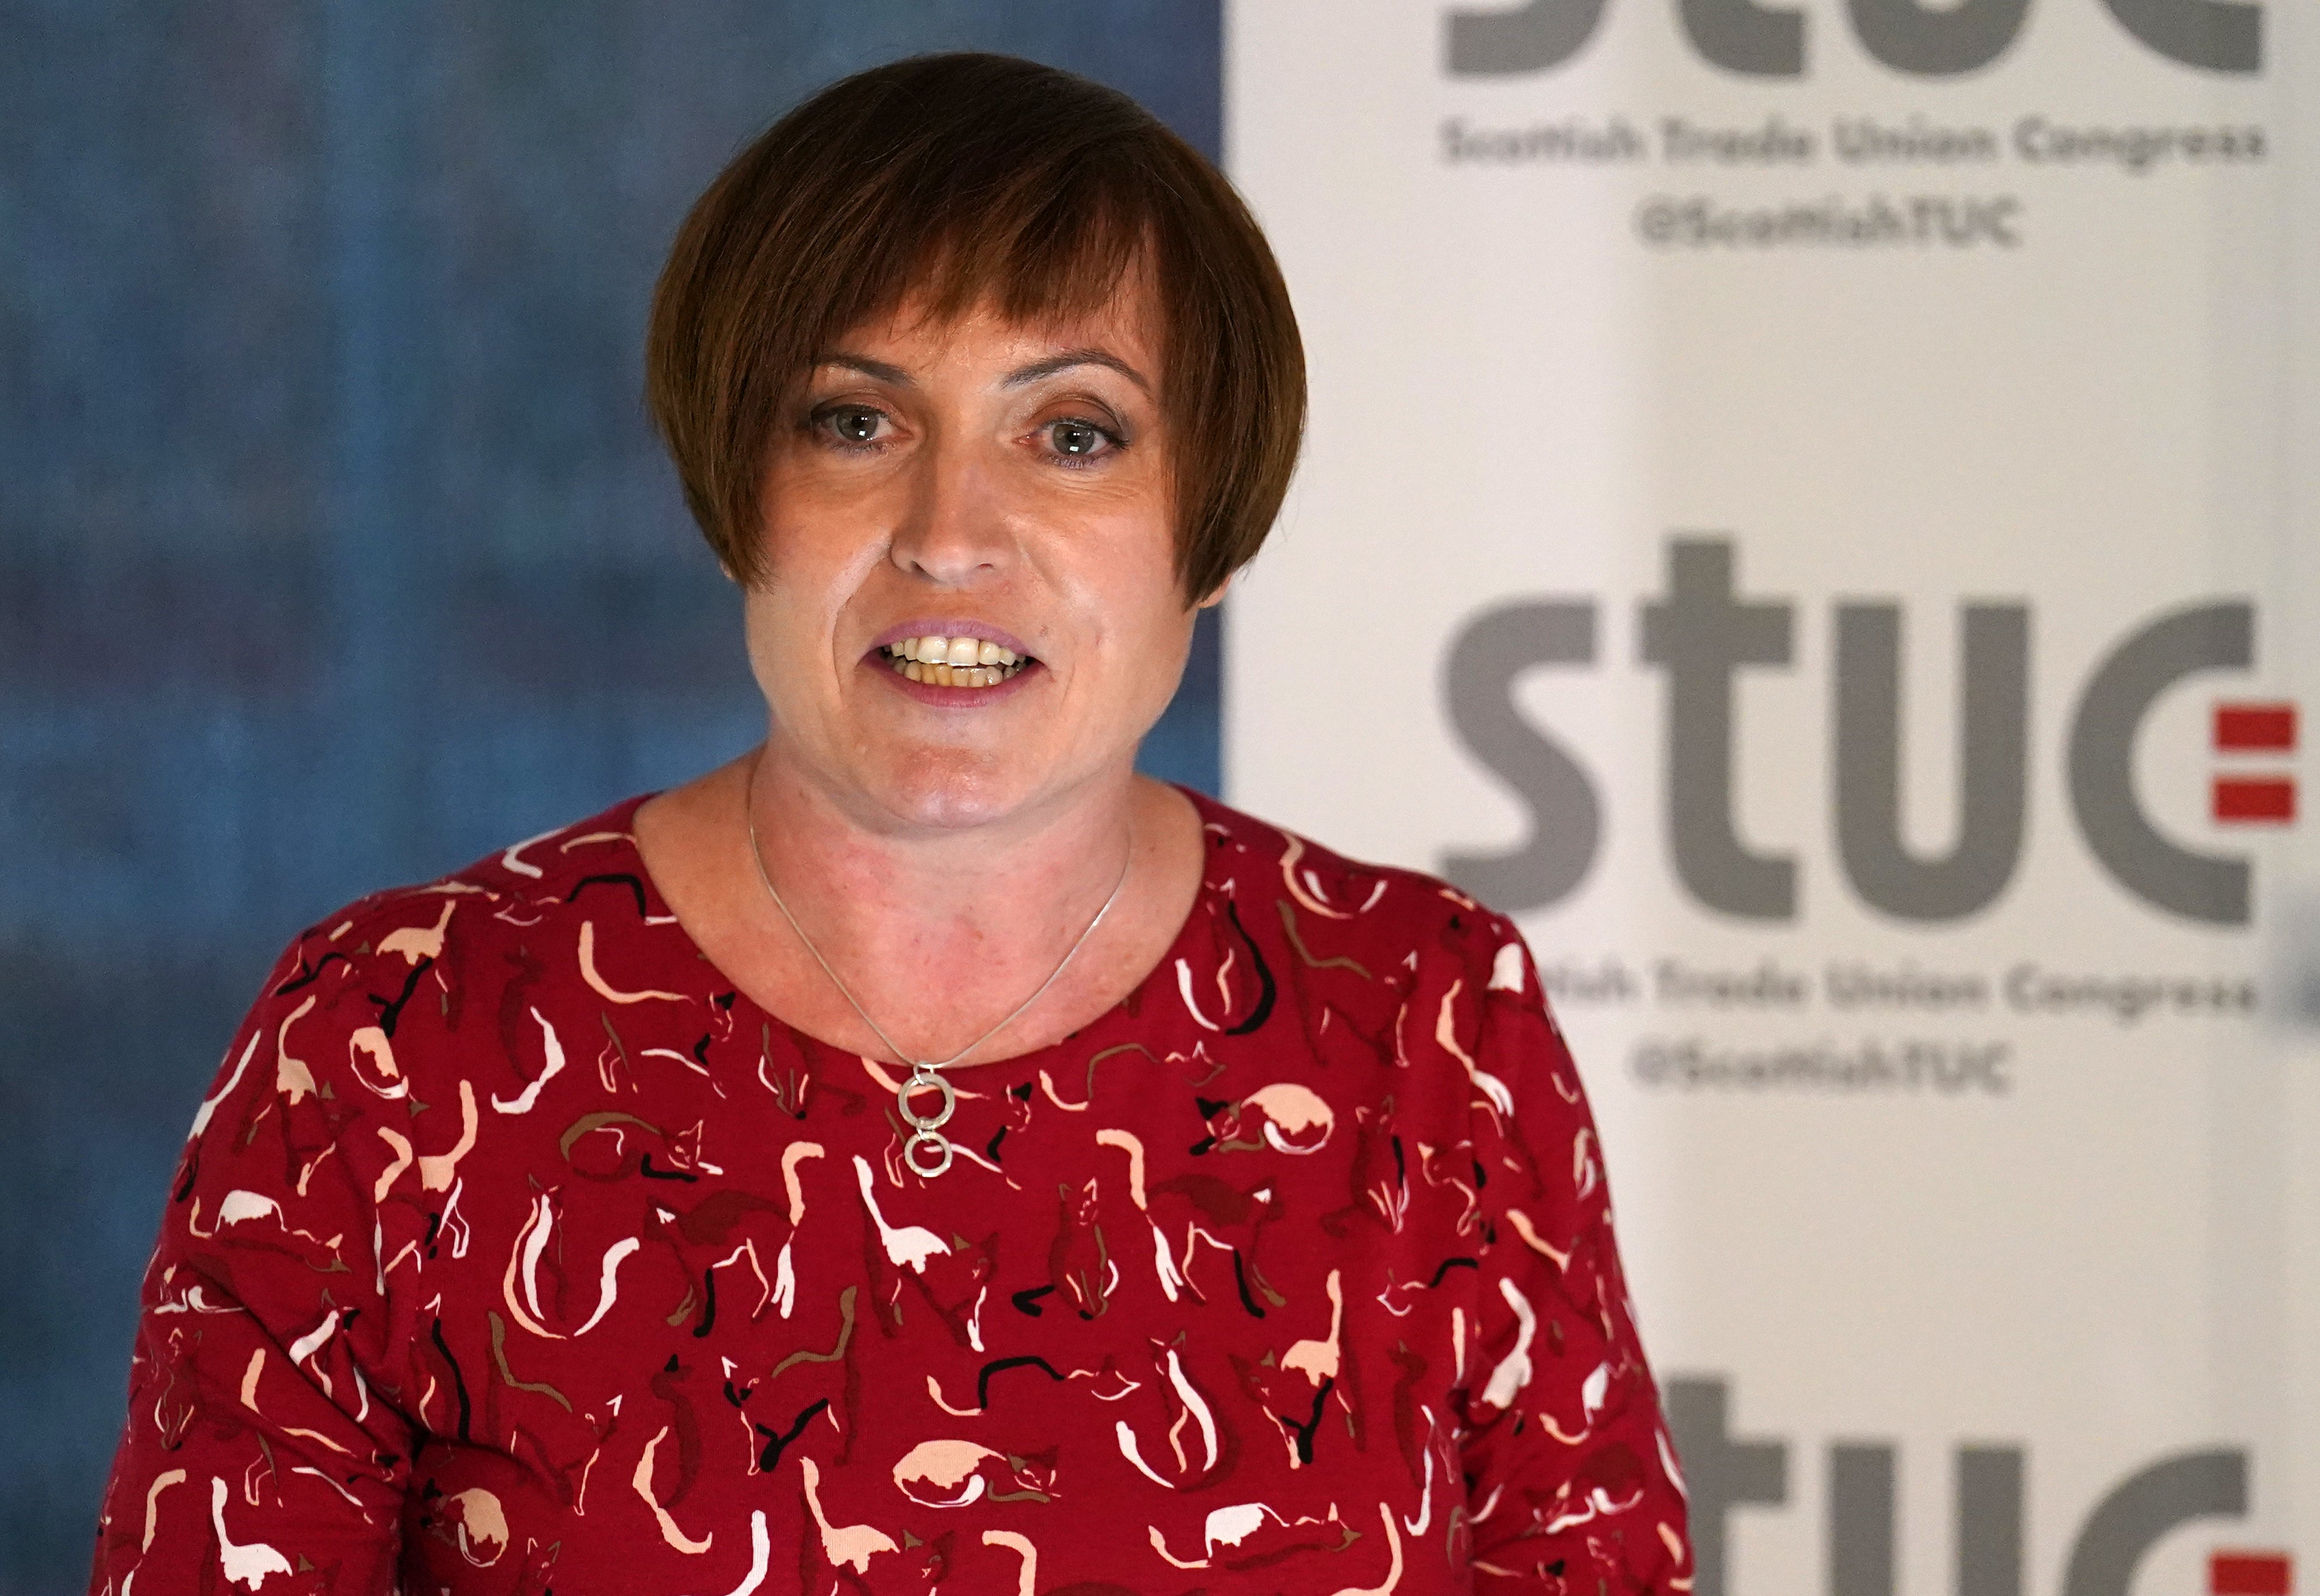 STUC general secretary Roz Foyer praised the actions of unions (Andrew Milligan/PA)